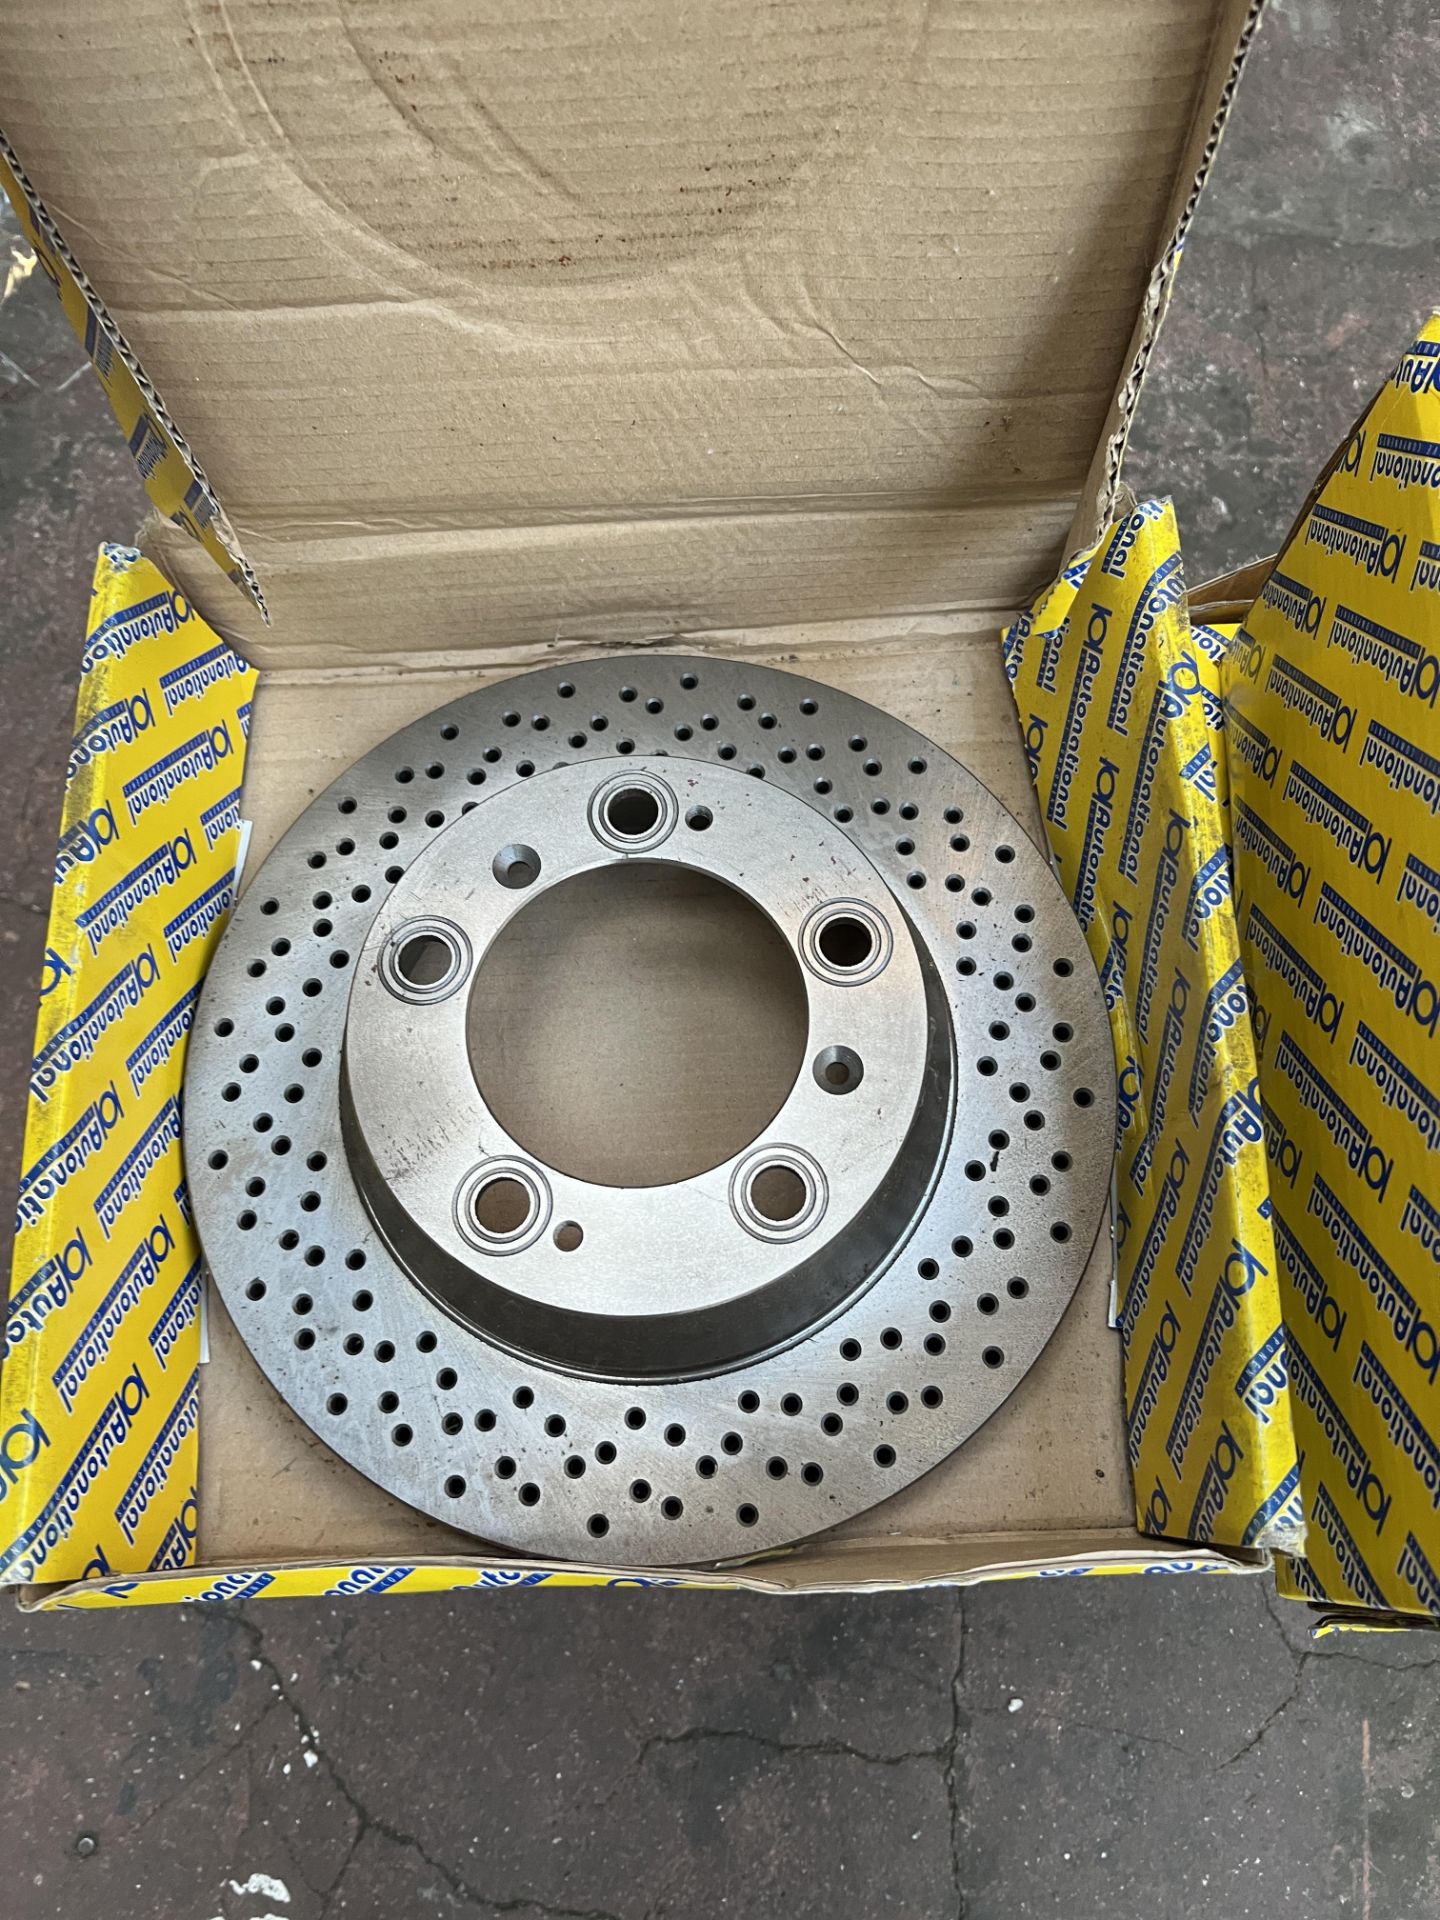 15: Boxed Autonational Vented Brake Discs for Porsche Boxster (BDC1604) and 911 (BDC1705) models - Image 8 of 9